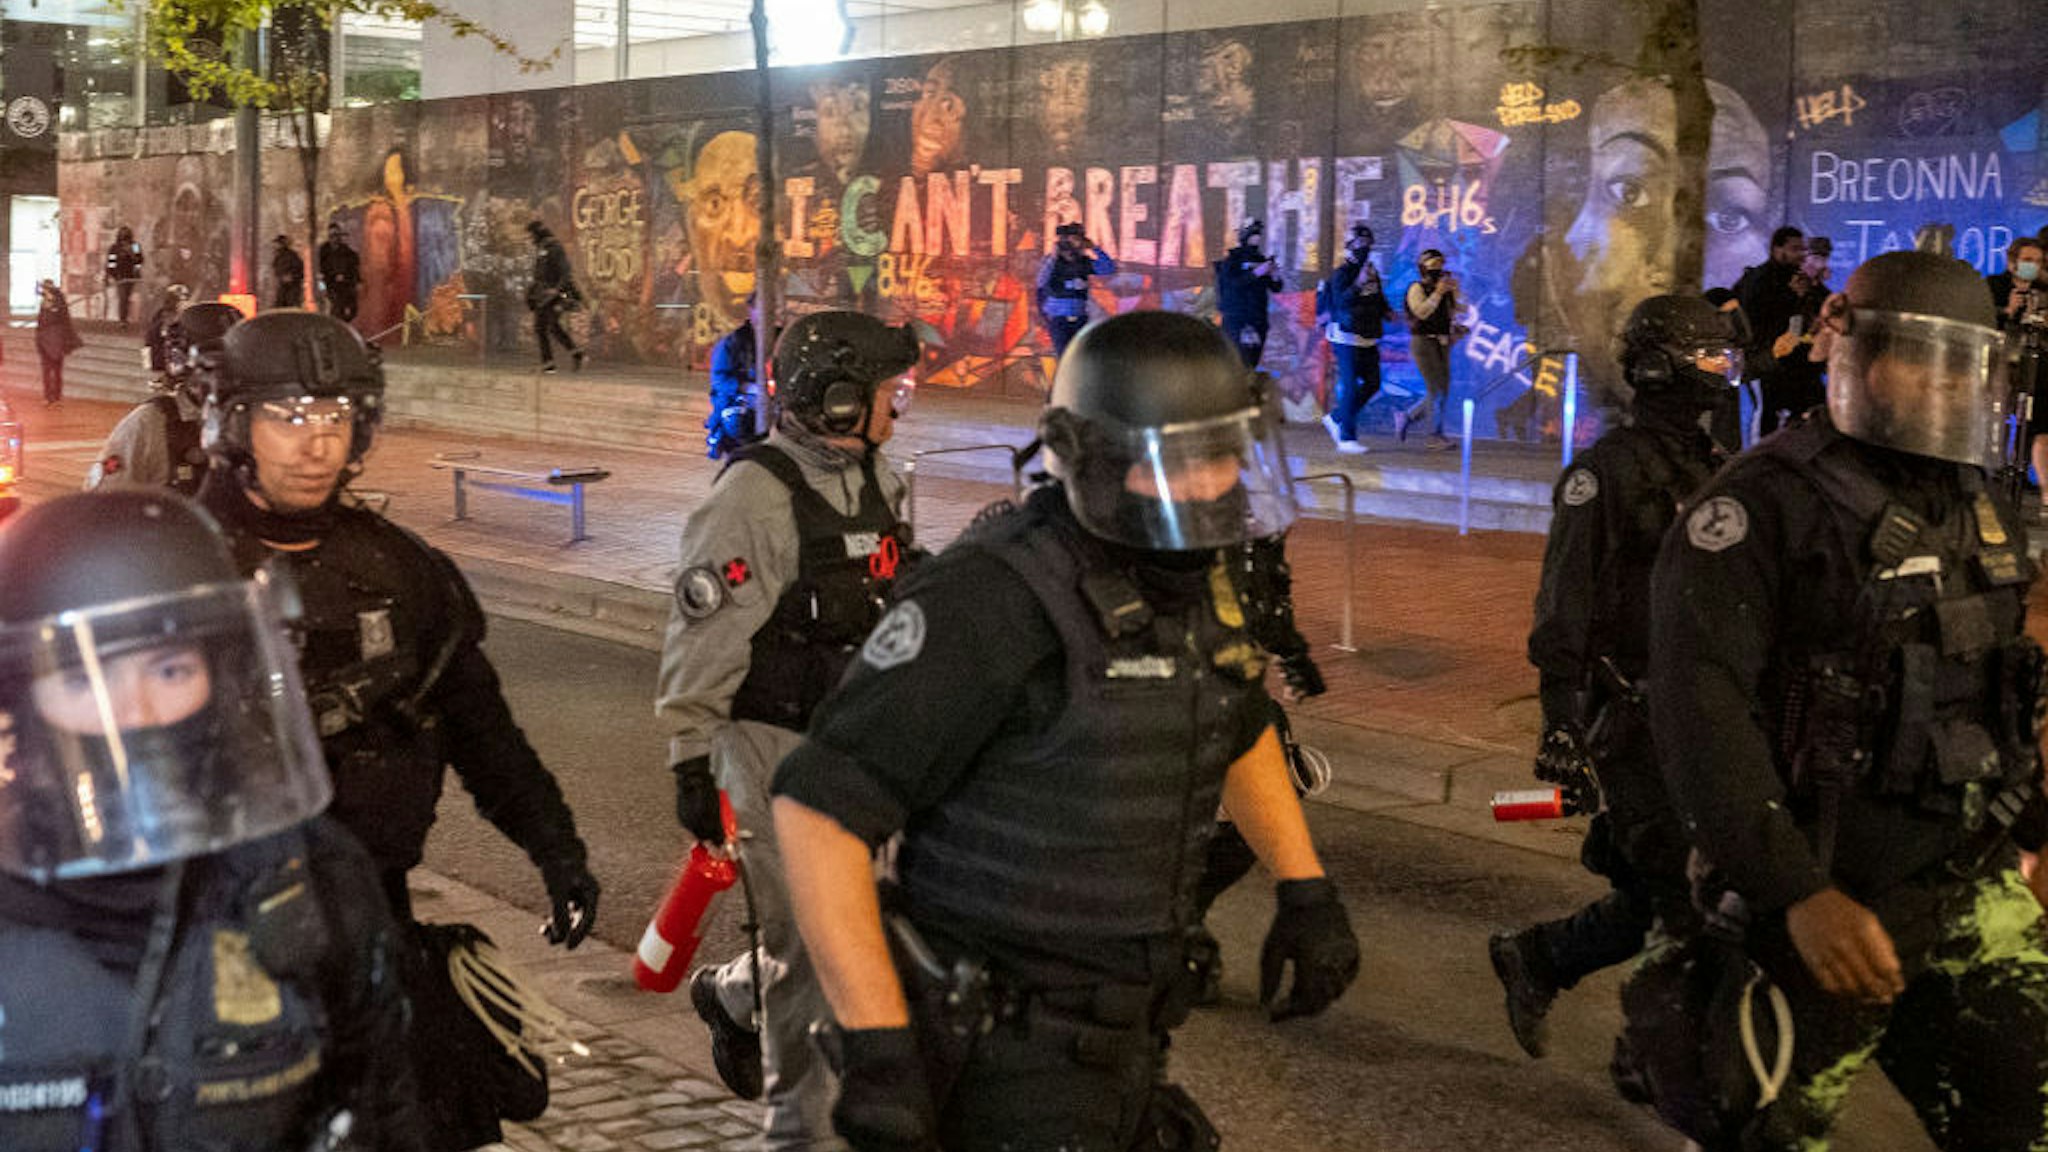 Portland police disperse a crowd of protesters past a mural of George Floyd and Breonna Taylor on September 26, 2020 in Portland, Oregon. Oregon Governor Kate Brown declared a state of emergency prior to Saturday's protest and Proud Boy rally, as fears of political violence between far-right groups and Black Lives Matter protesters grew. (Photo by Nathan Howard/Getty Images)